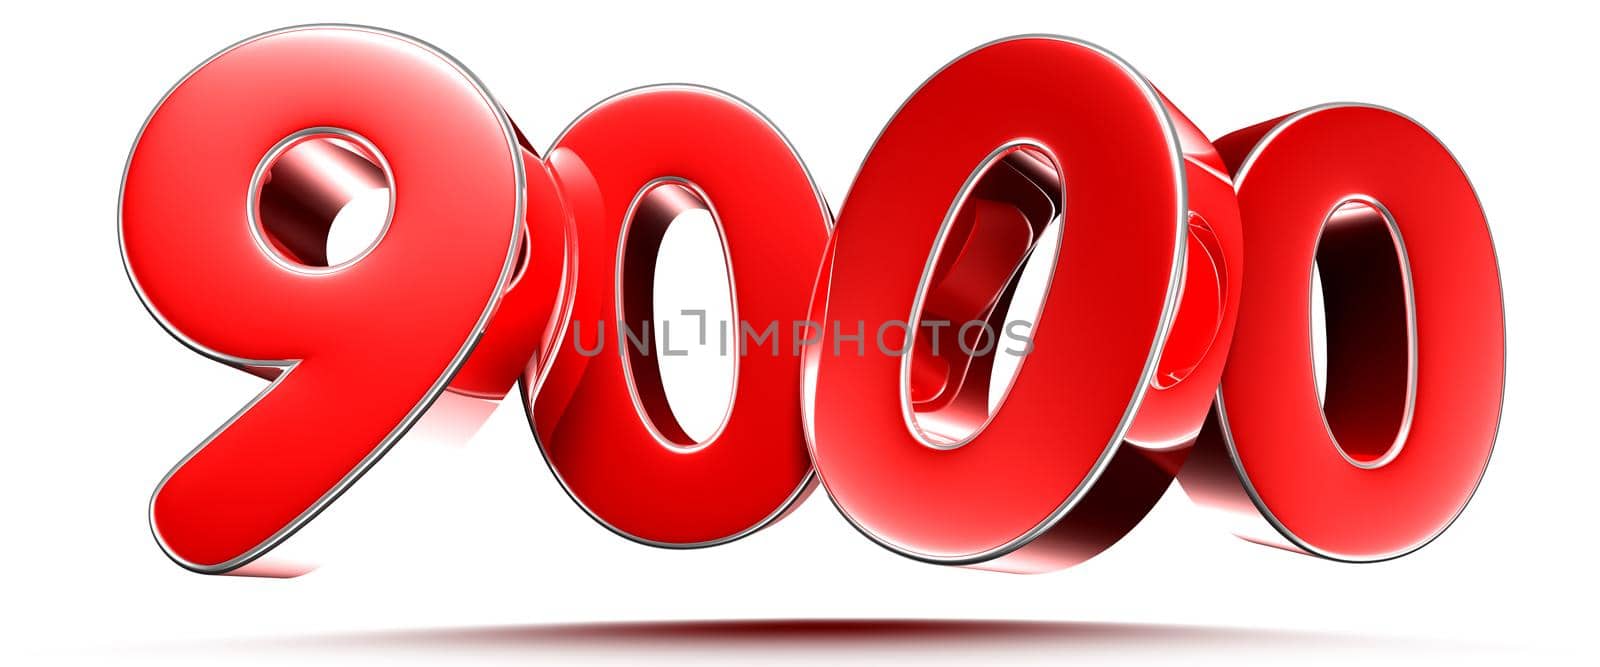 Rounded red numbers 9000 on white background 3D illustration with clipping path by thitimontoyai